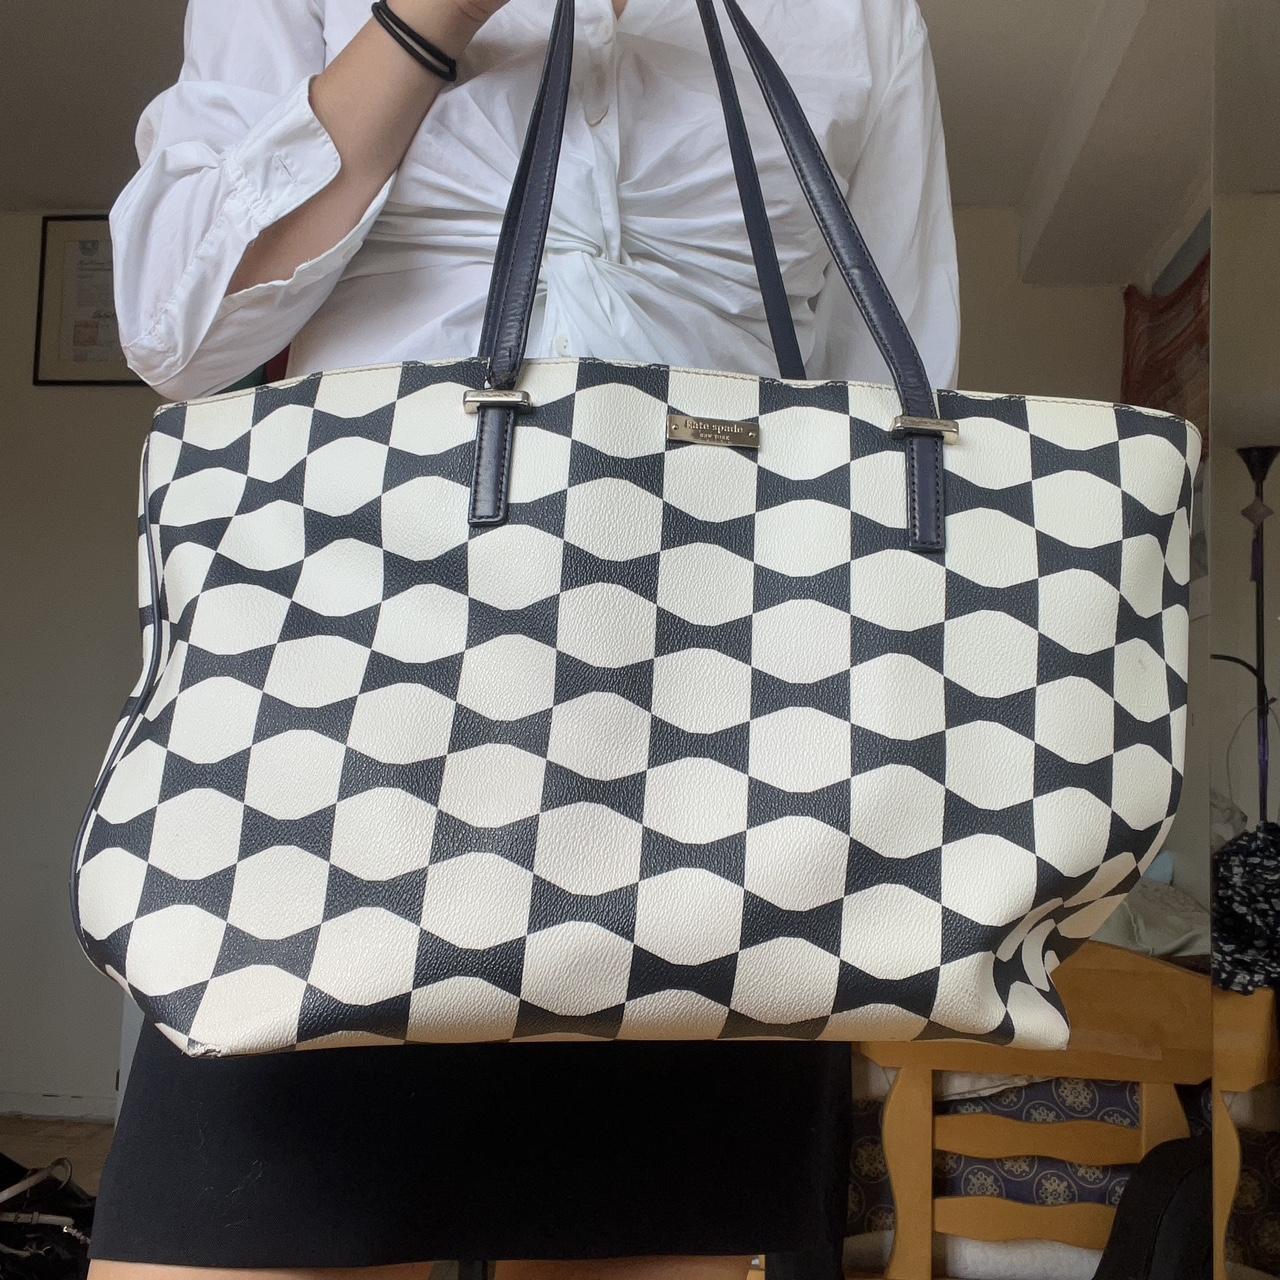 black and white kate spade leather tote bag/hand - Depop